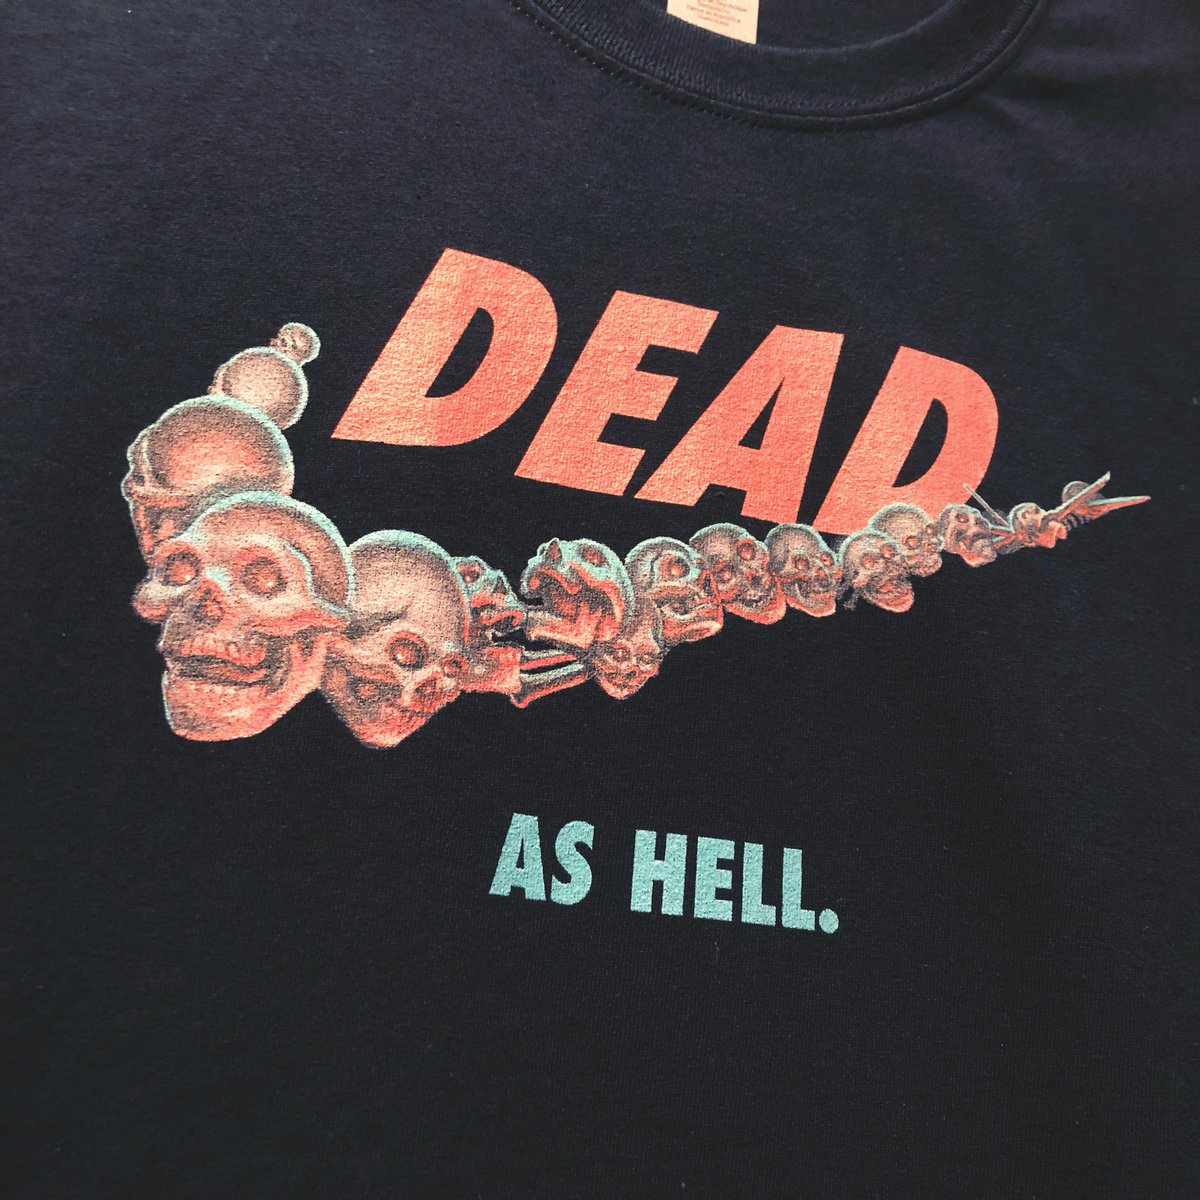 Image of Dead As Hell T-Shirt